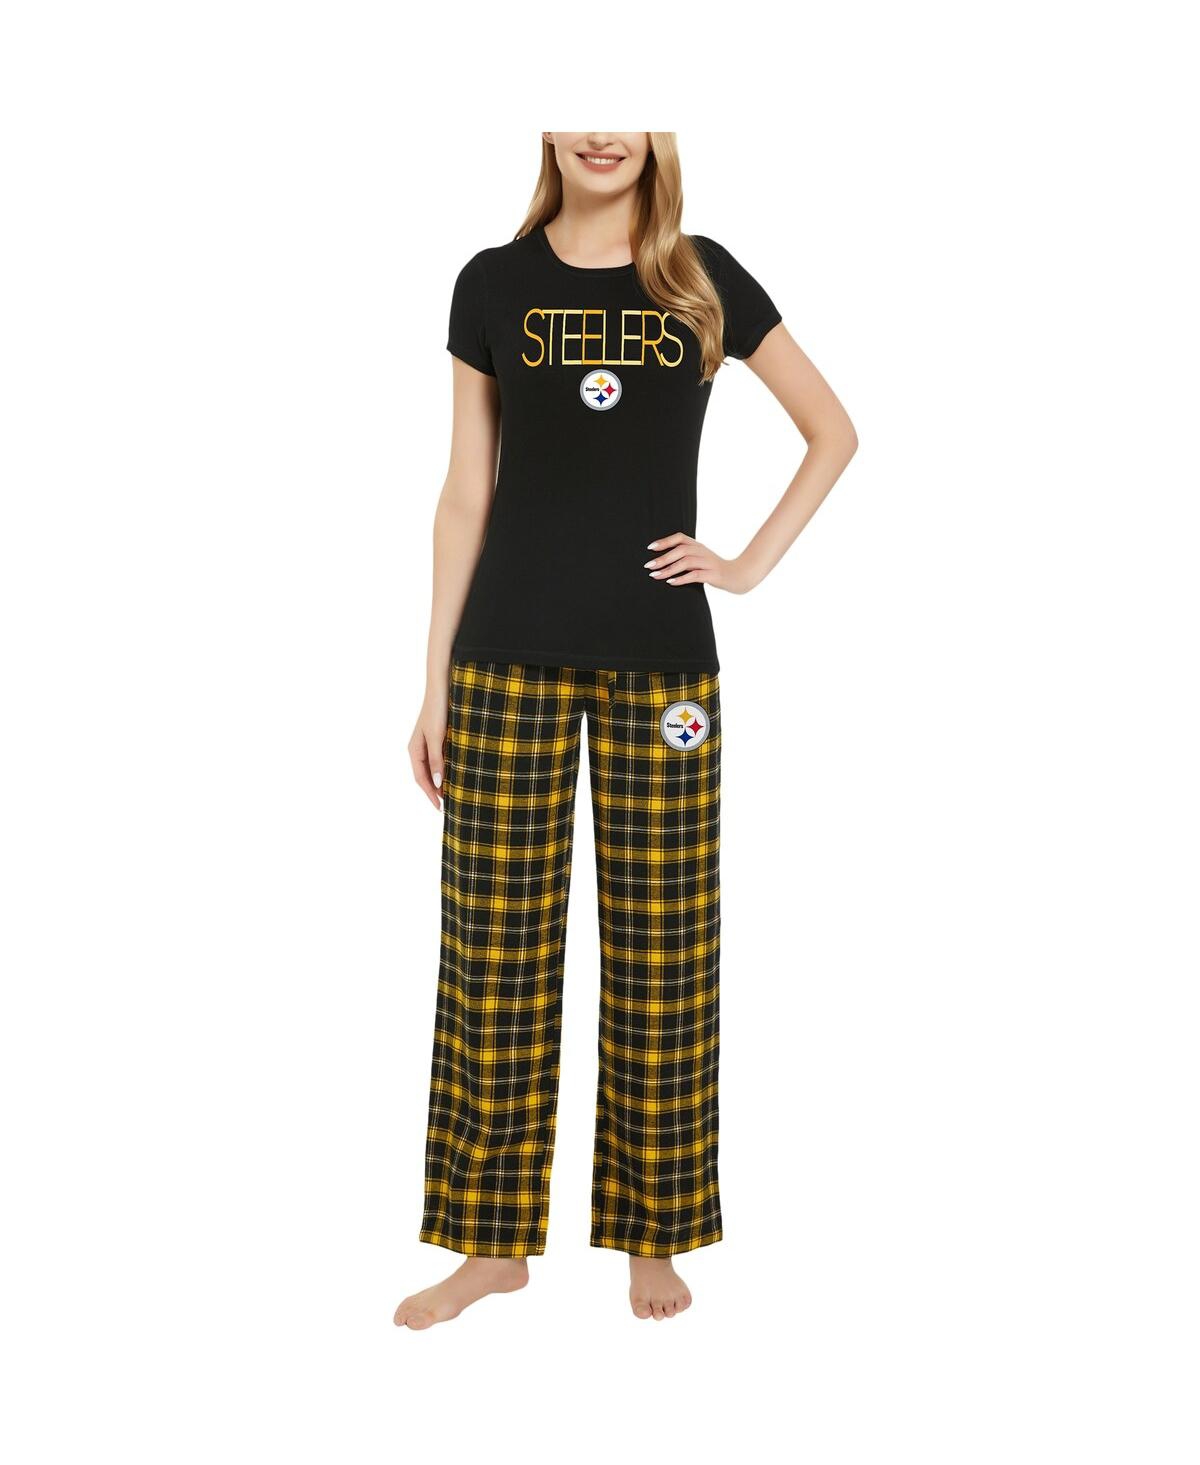 Women's Concepts Sport Black, Gold Pittsburgh Steelers ArcticÂ T-shirt and Flannel Pants Sleep Set - Black, Gold